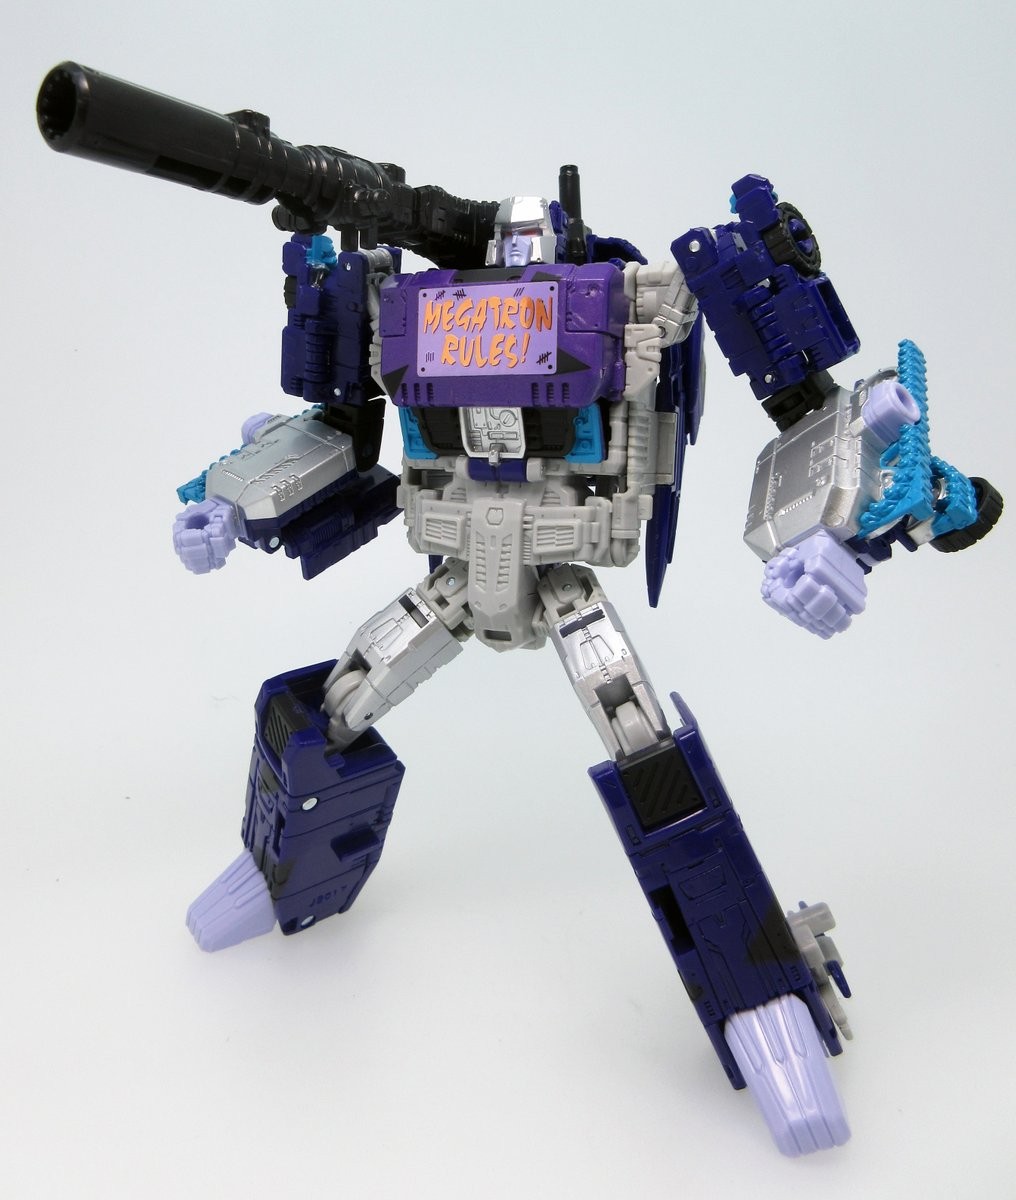 Transformers News: New Images of Takara Tomy Transformers Legends LG63 G2 Megatron with Noble